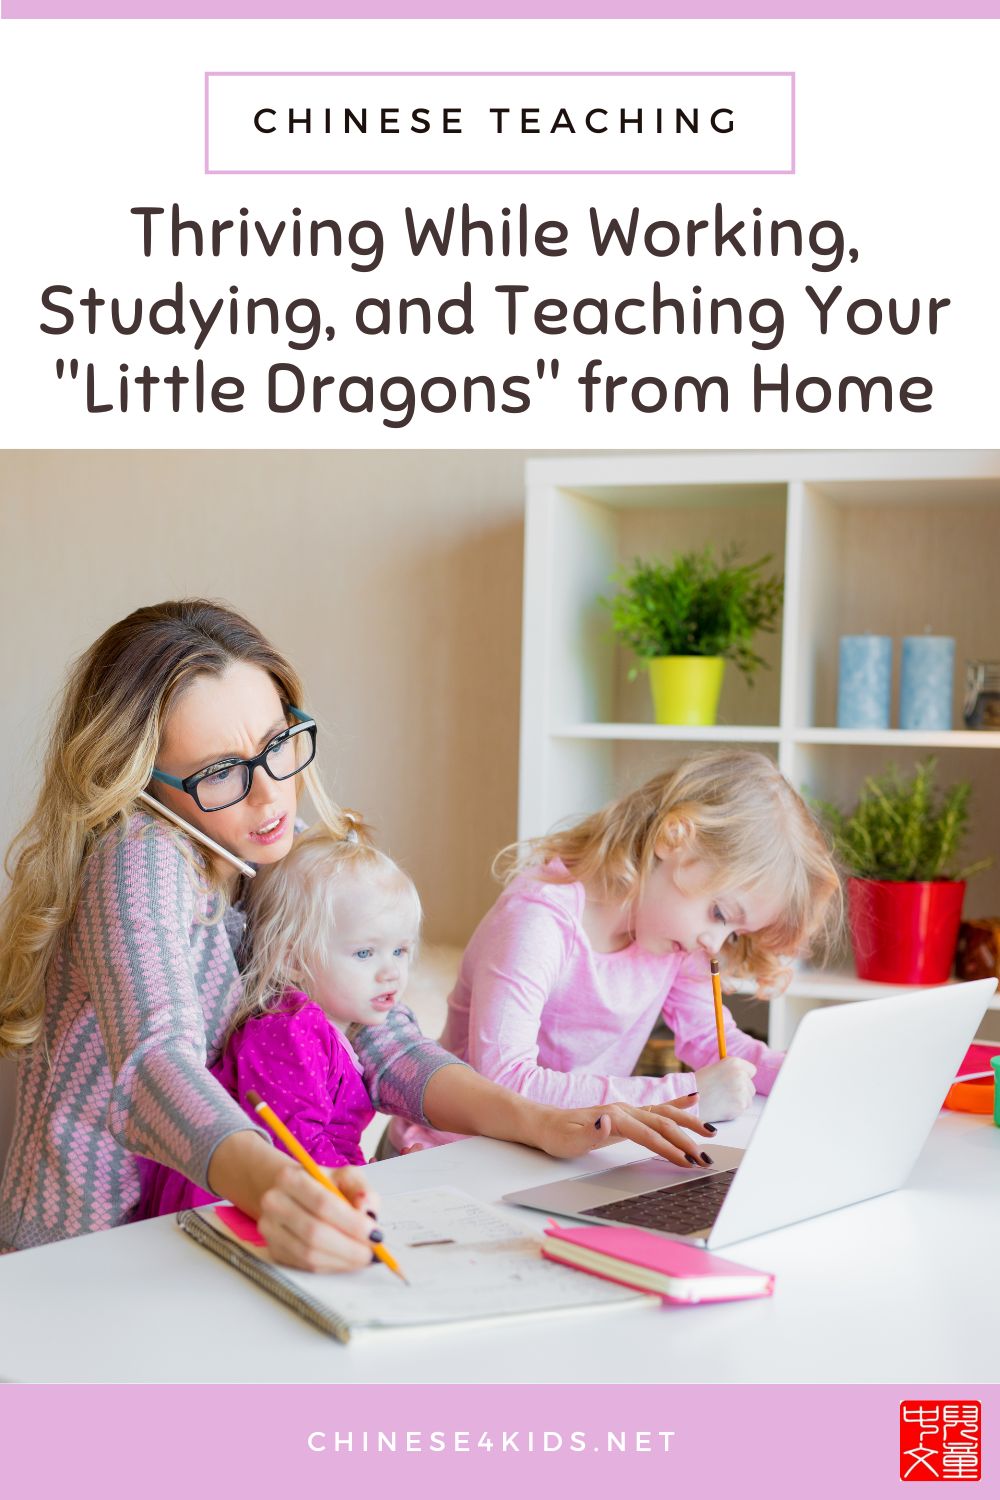 Thriving While Working, Studying, and Teaching Your "Little Dragons" from Home